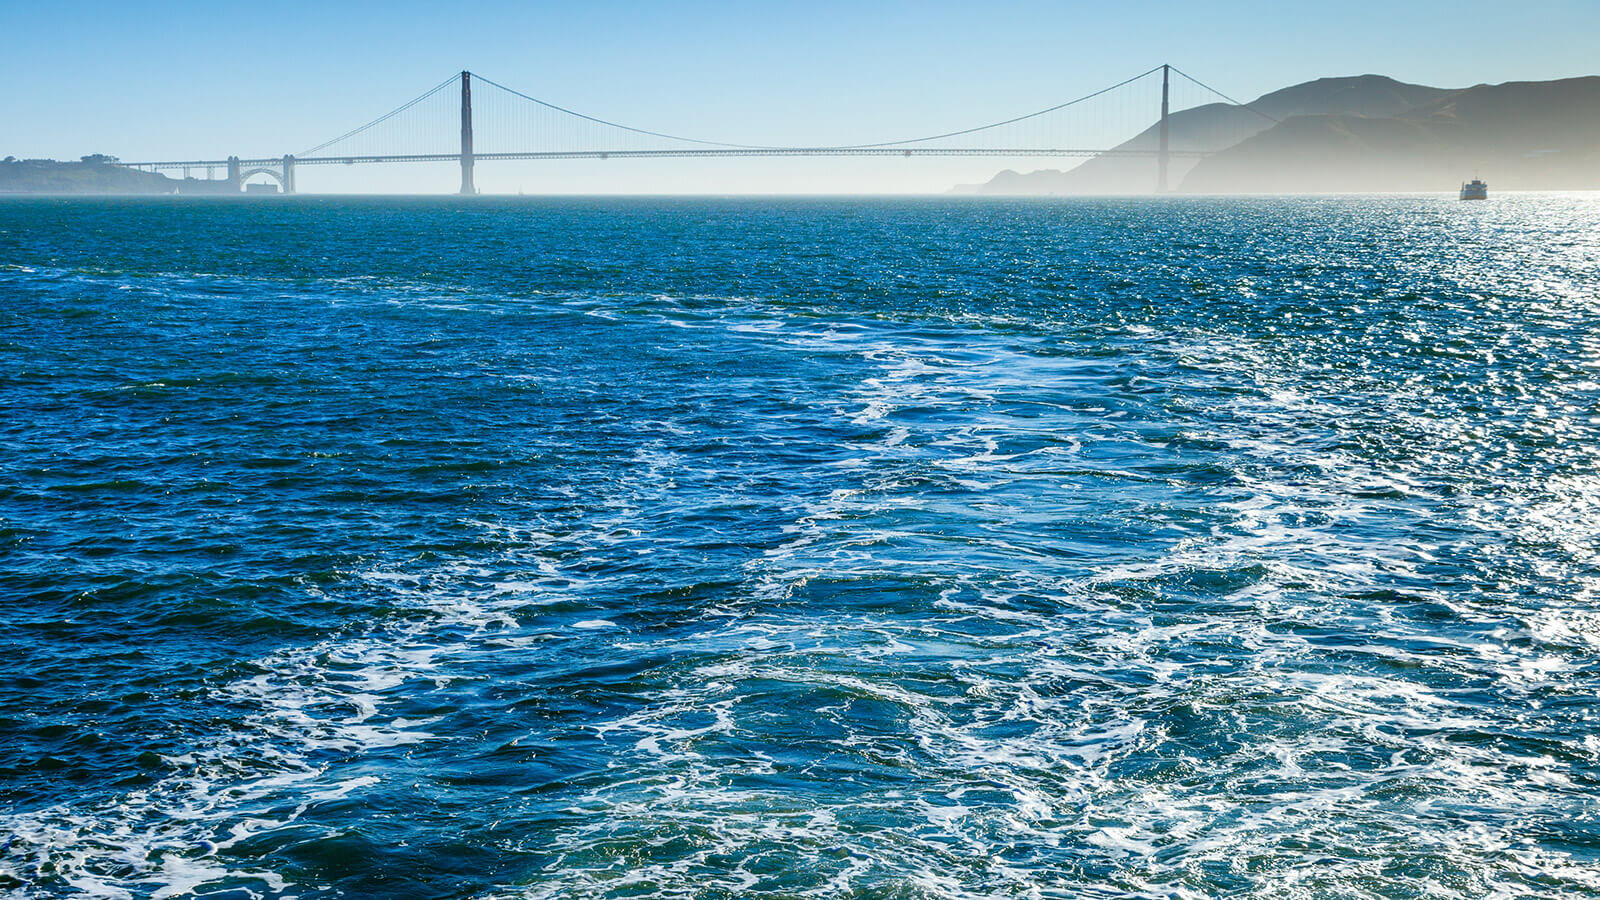 Wake of boat with Golden Gate Bridge in background